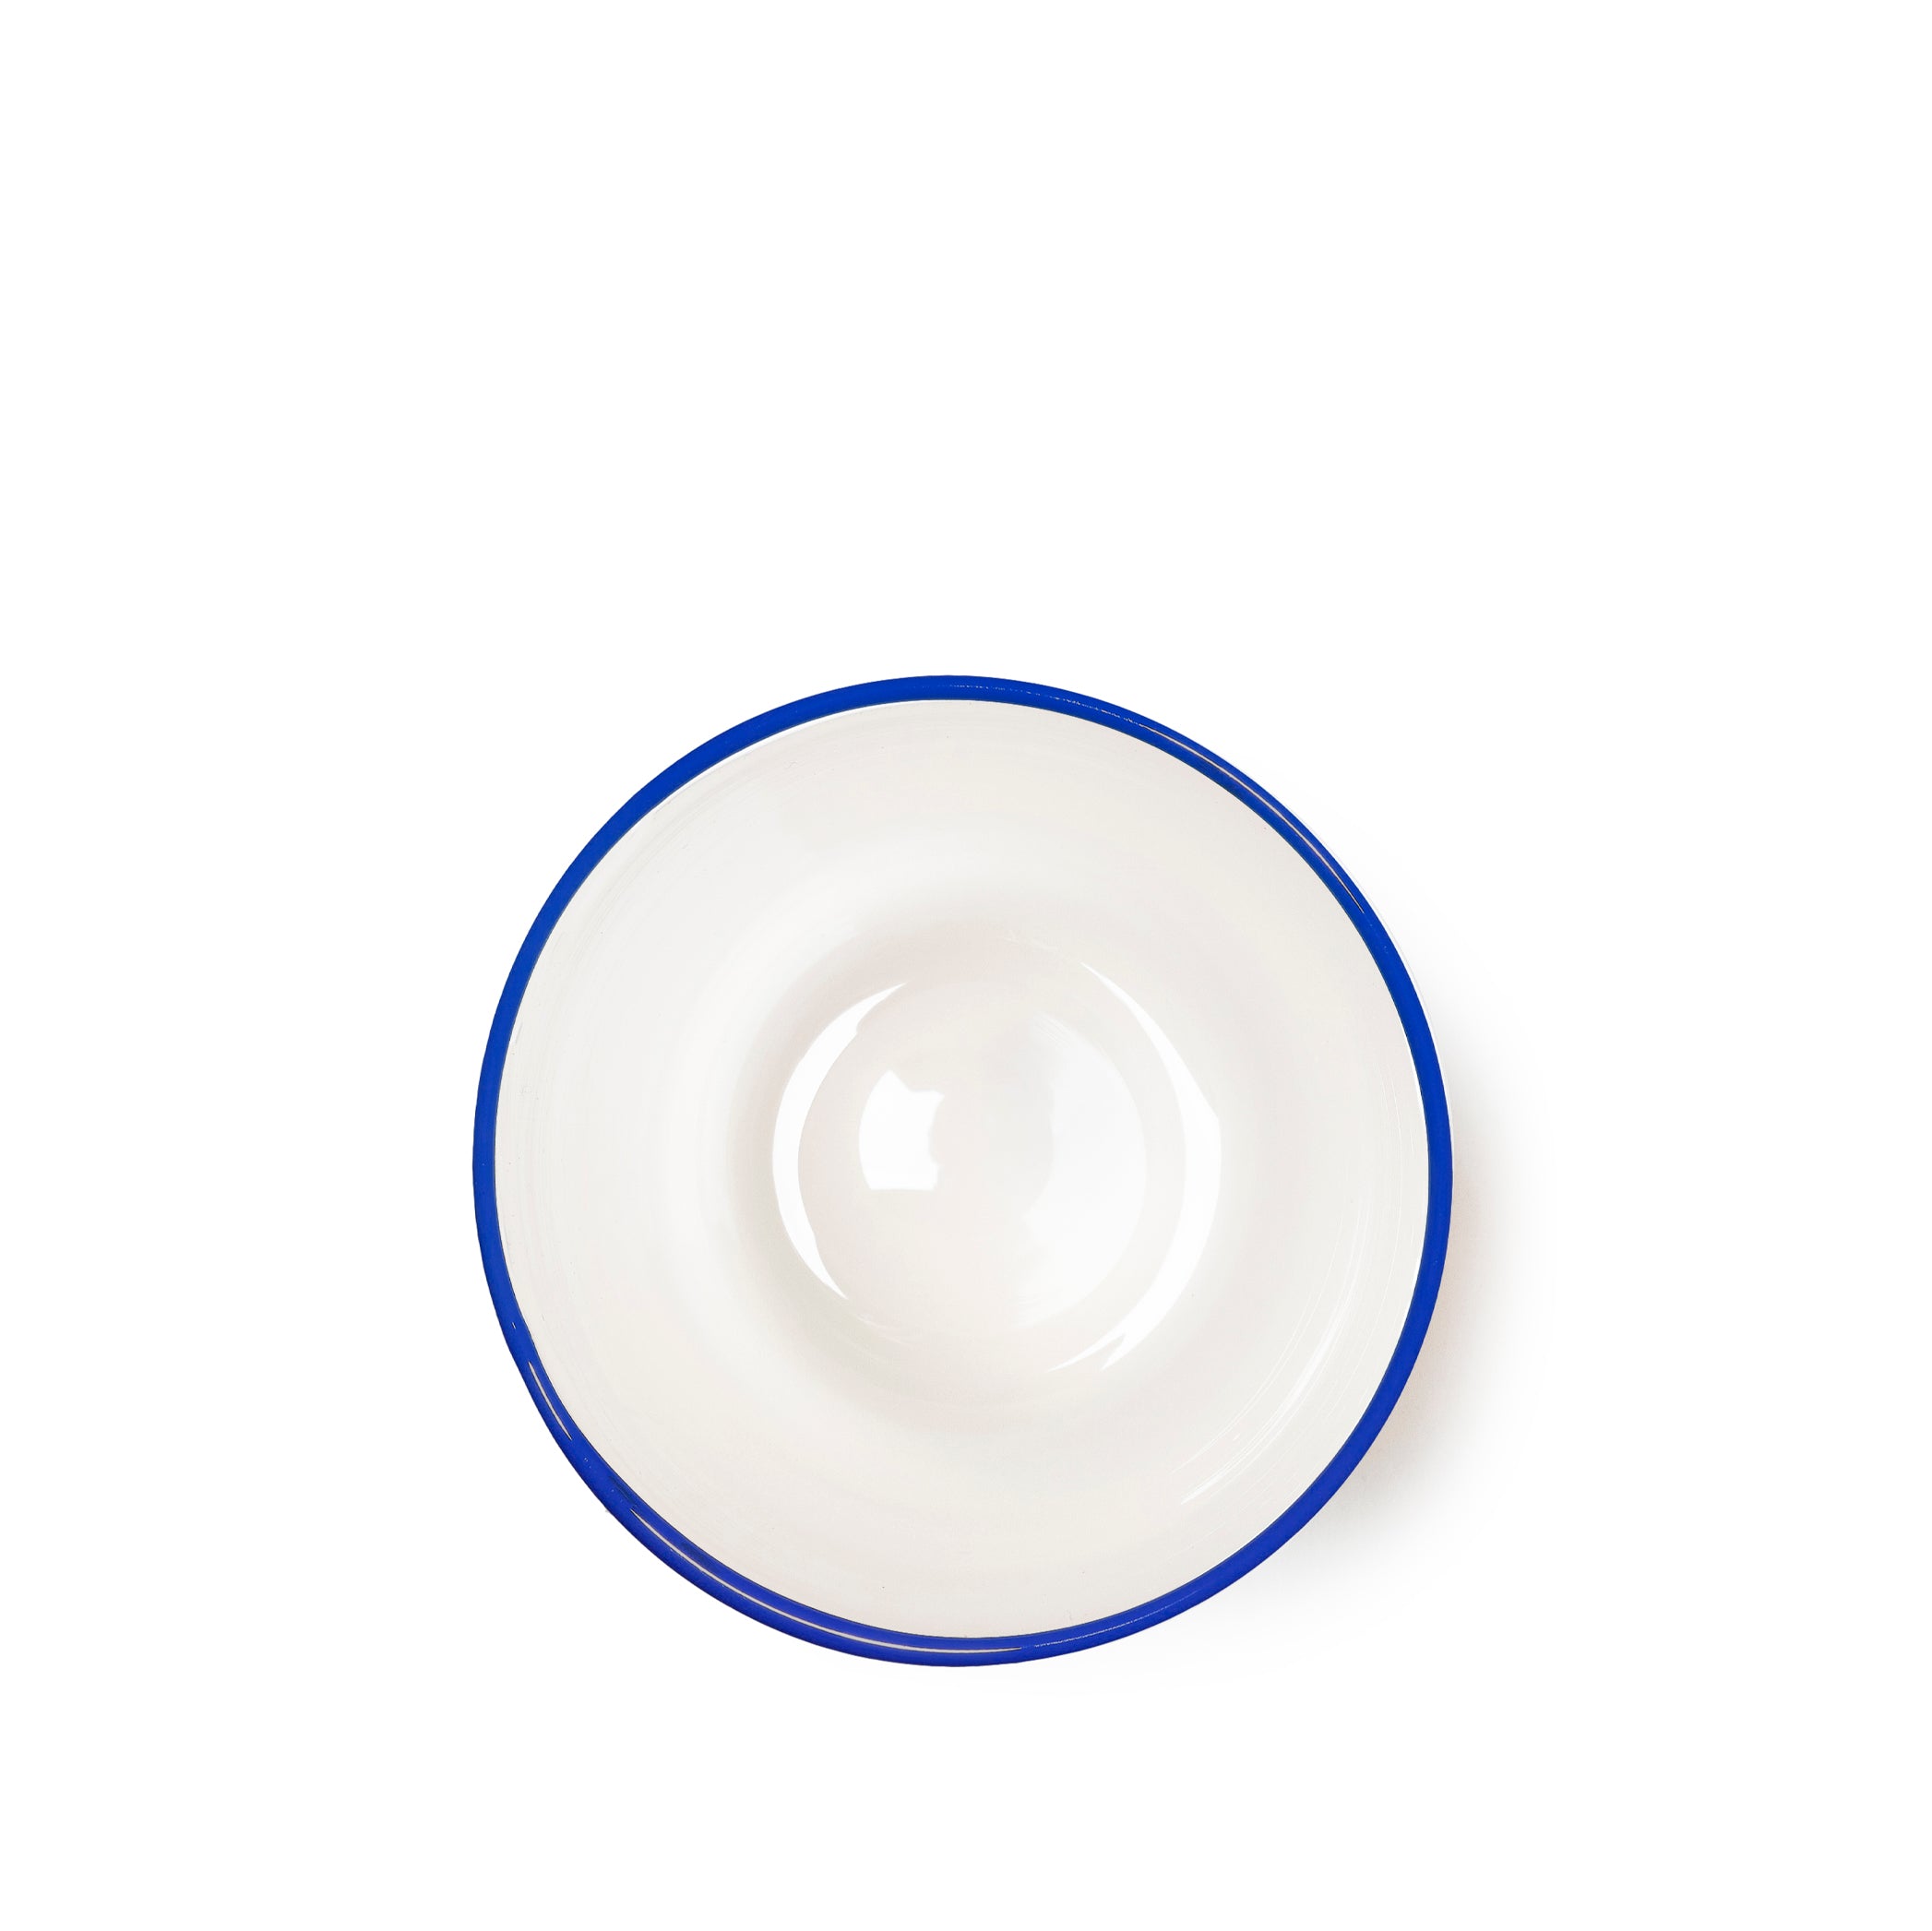 Handblown Bumba Glass in White with Royal Blue Rim, 30cl